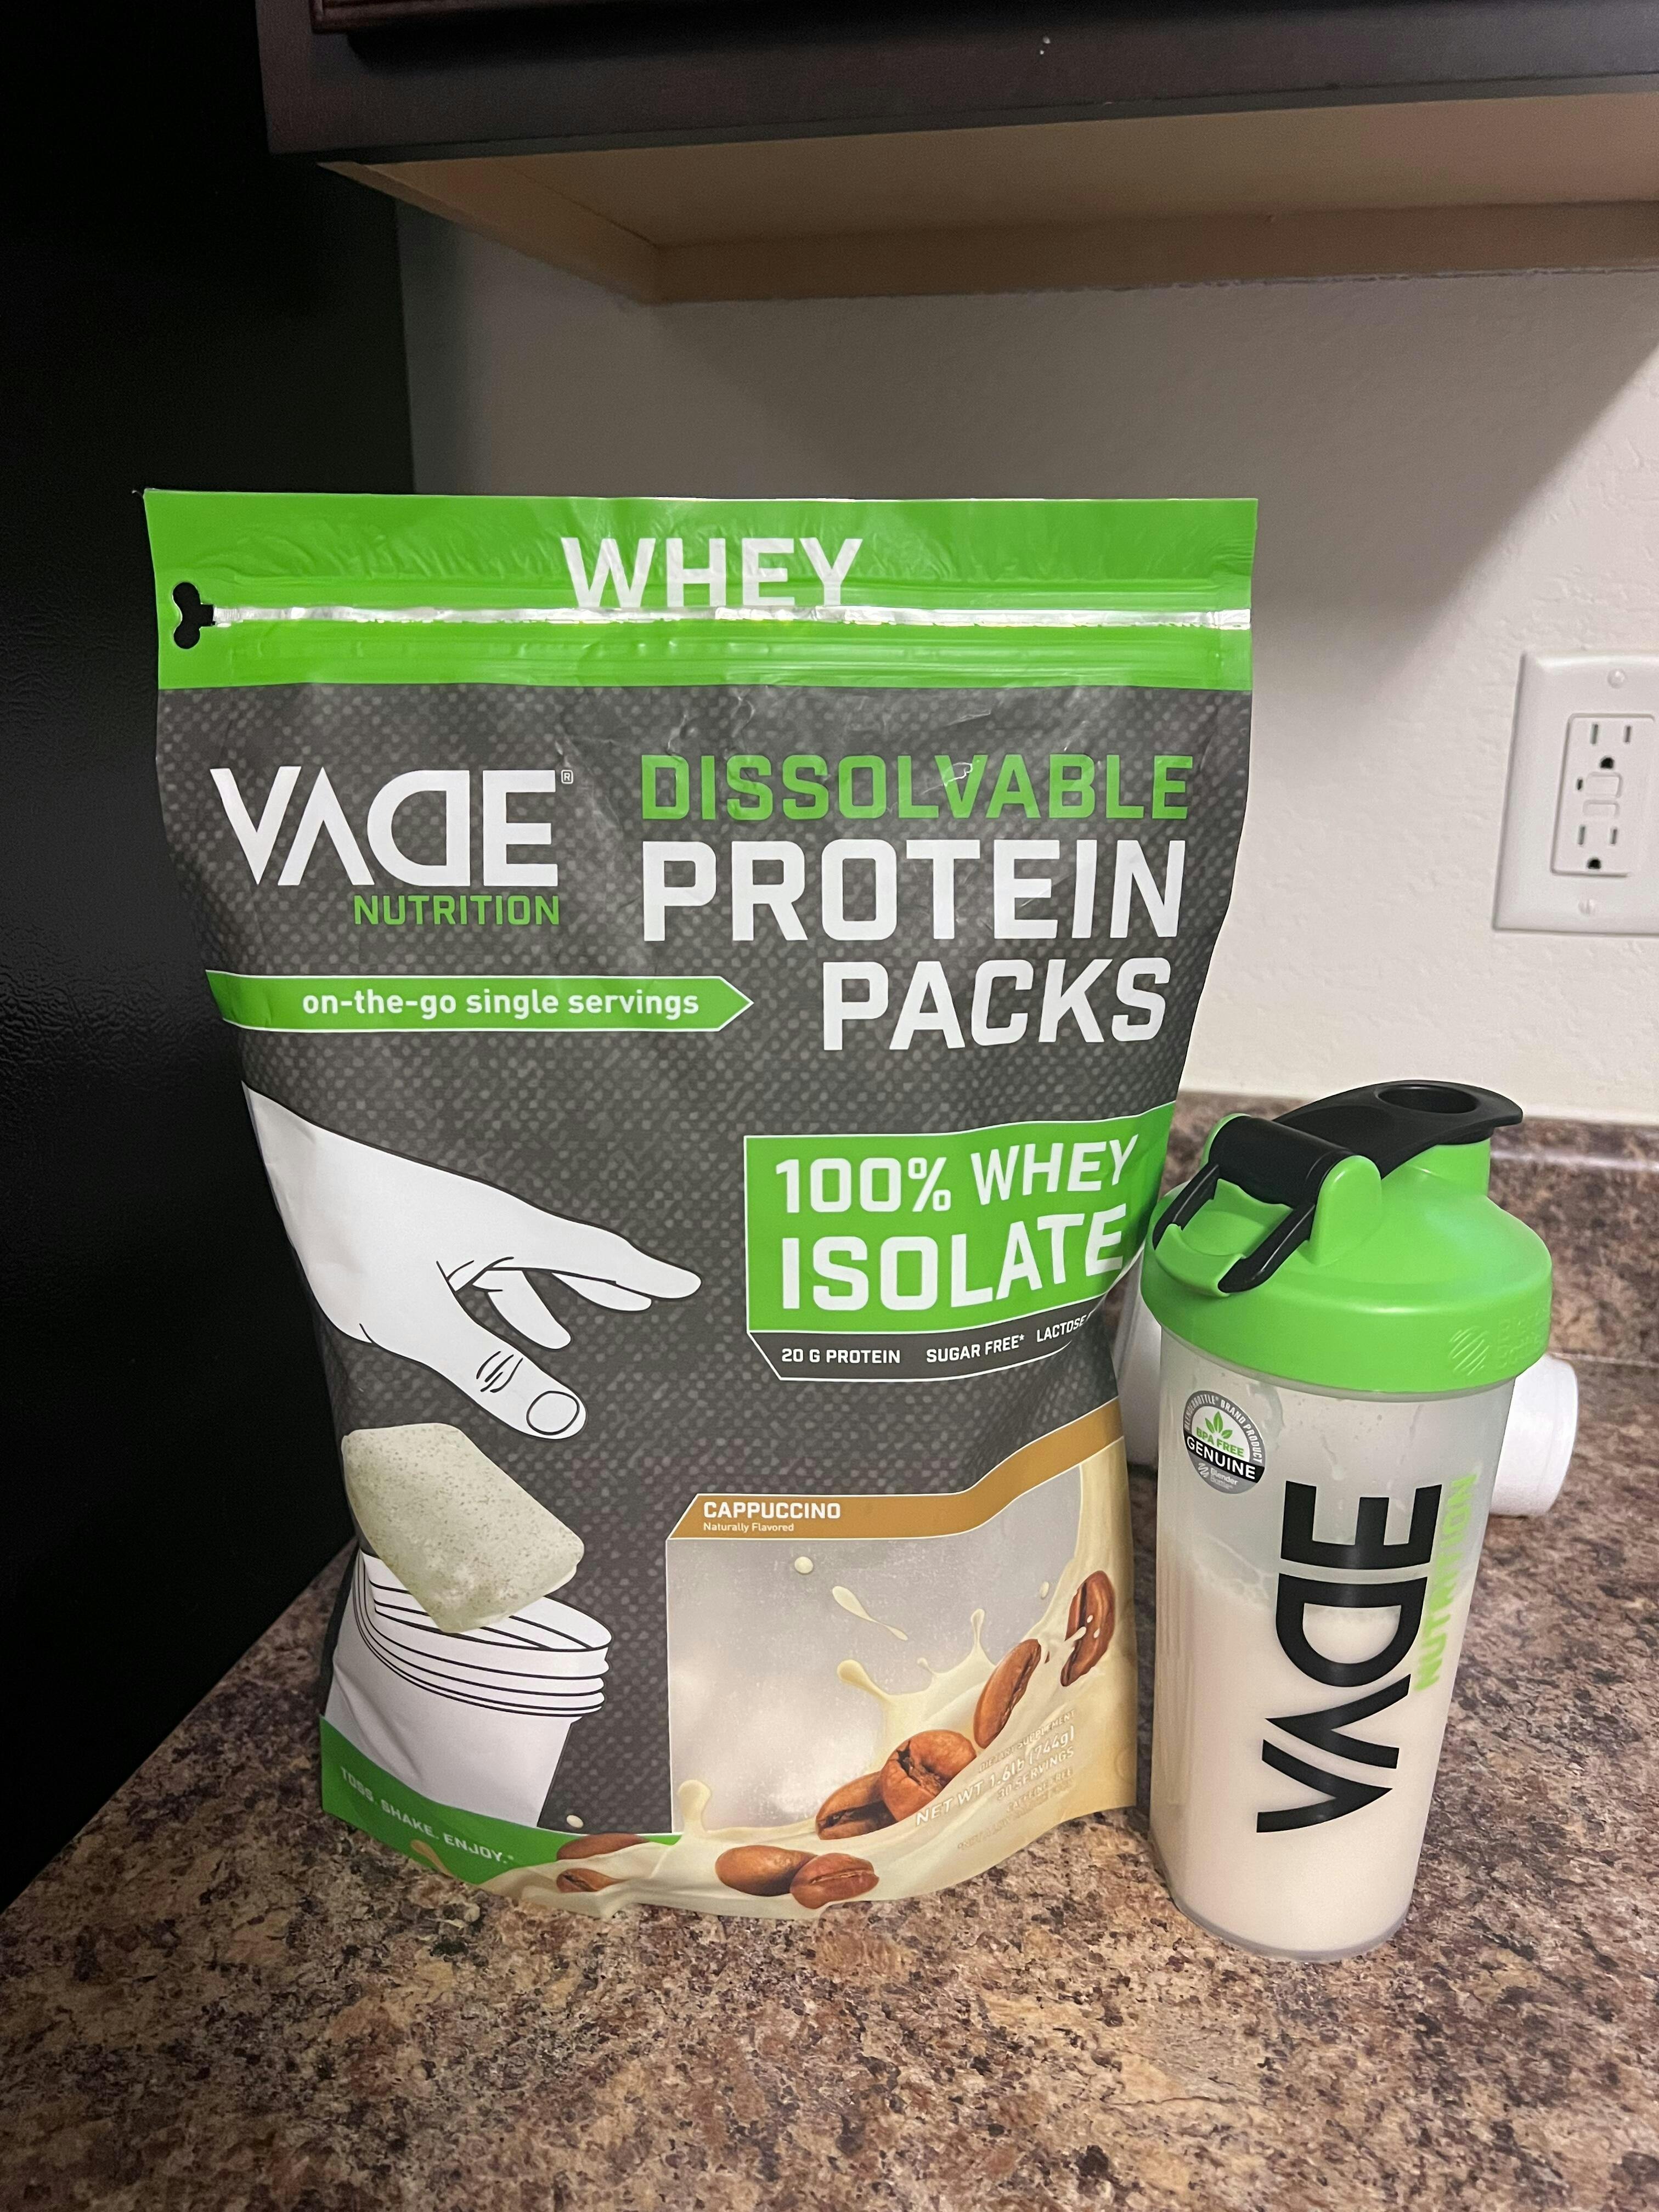 Vade Nutrition, Dissolvable Protein Packs, 100% Whey Isolate, Cappuccino